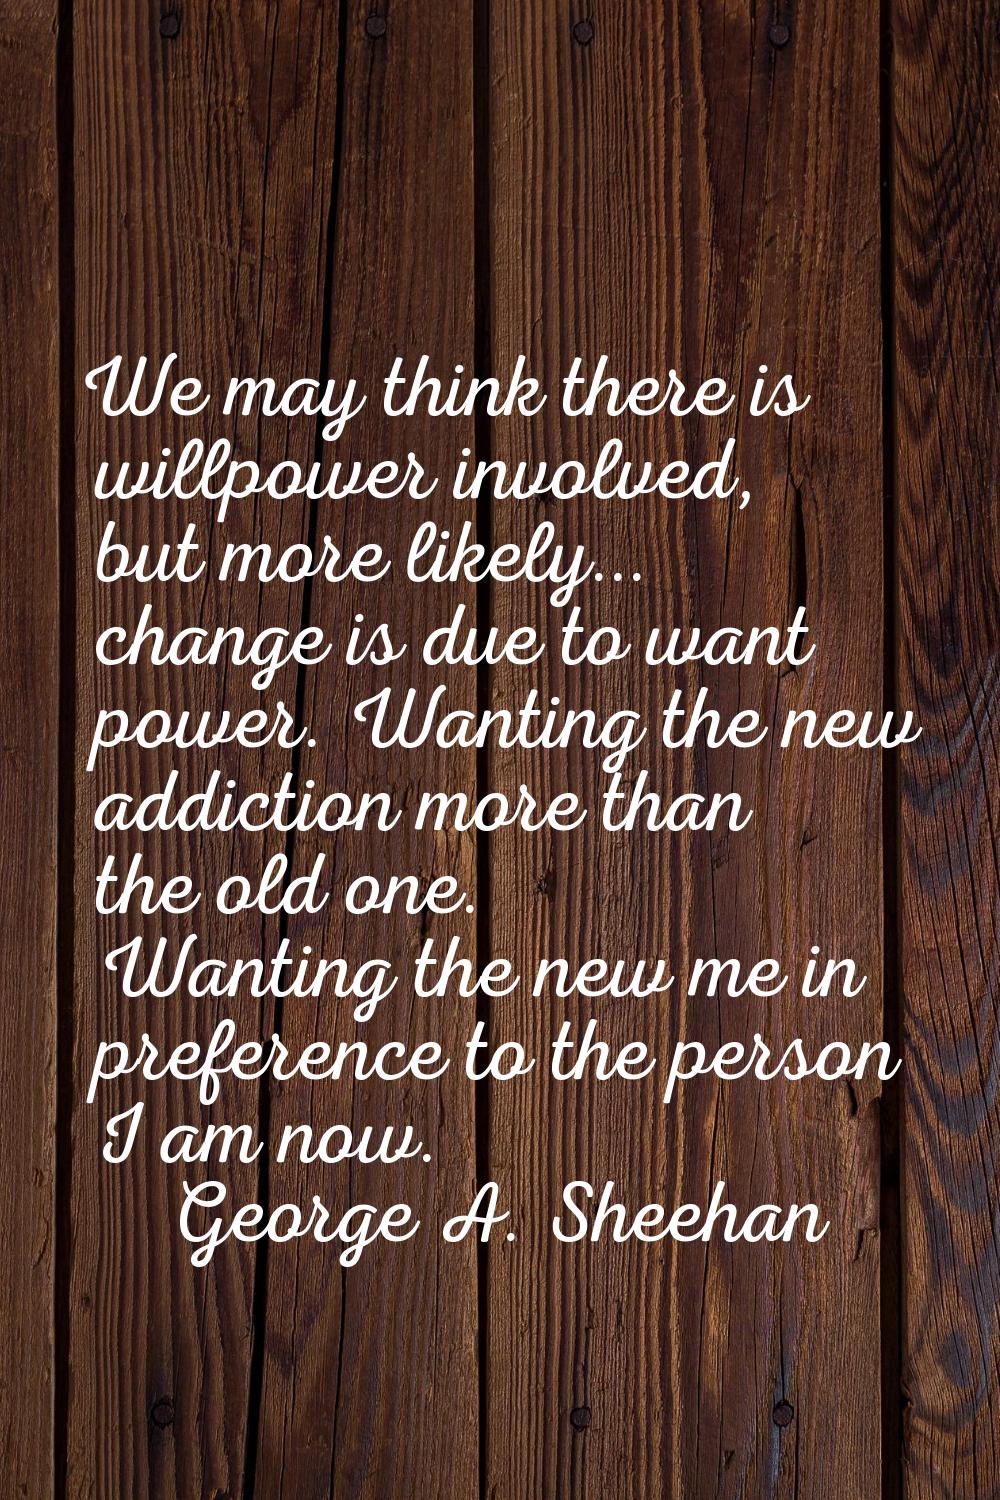 We may think there is willpower involved, but more likely... change is due to want power. Wanting t